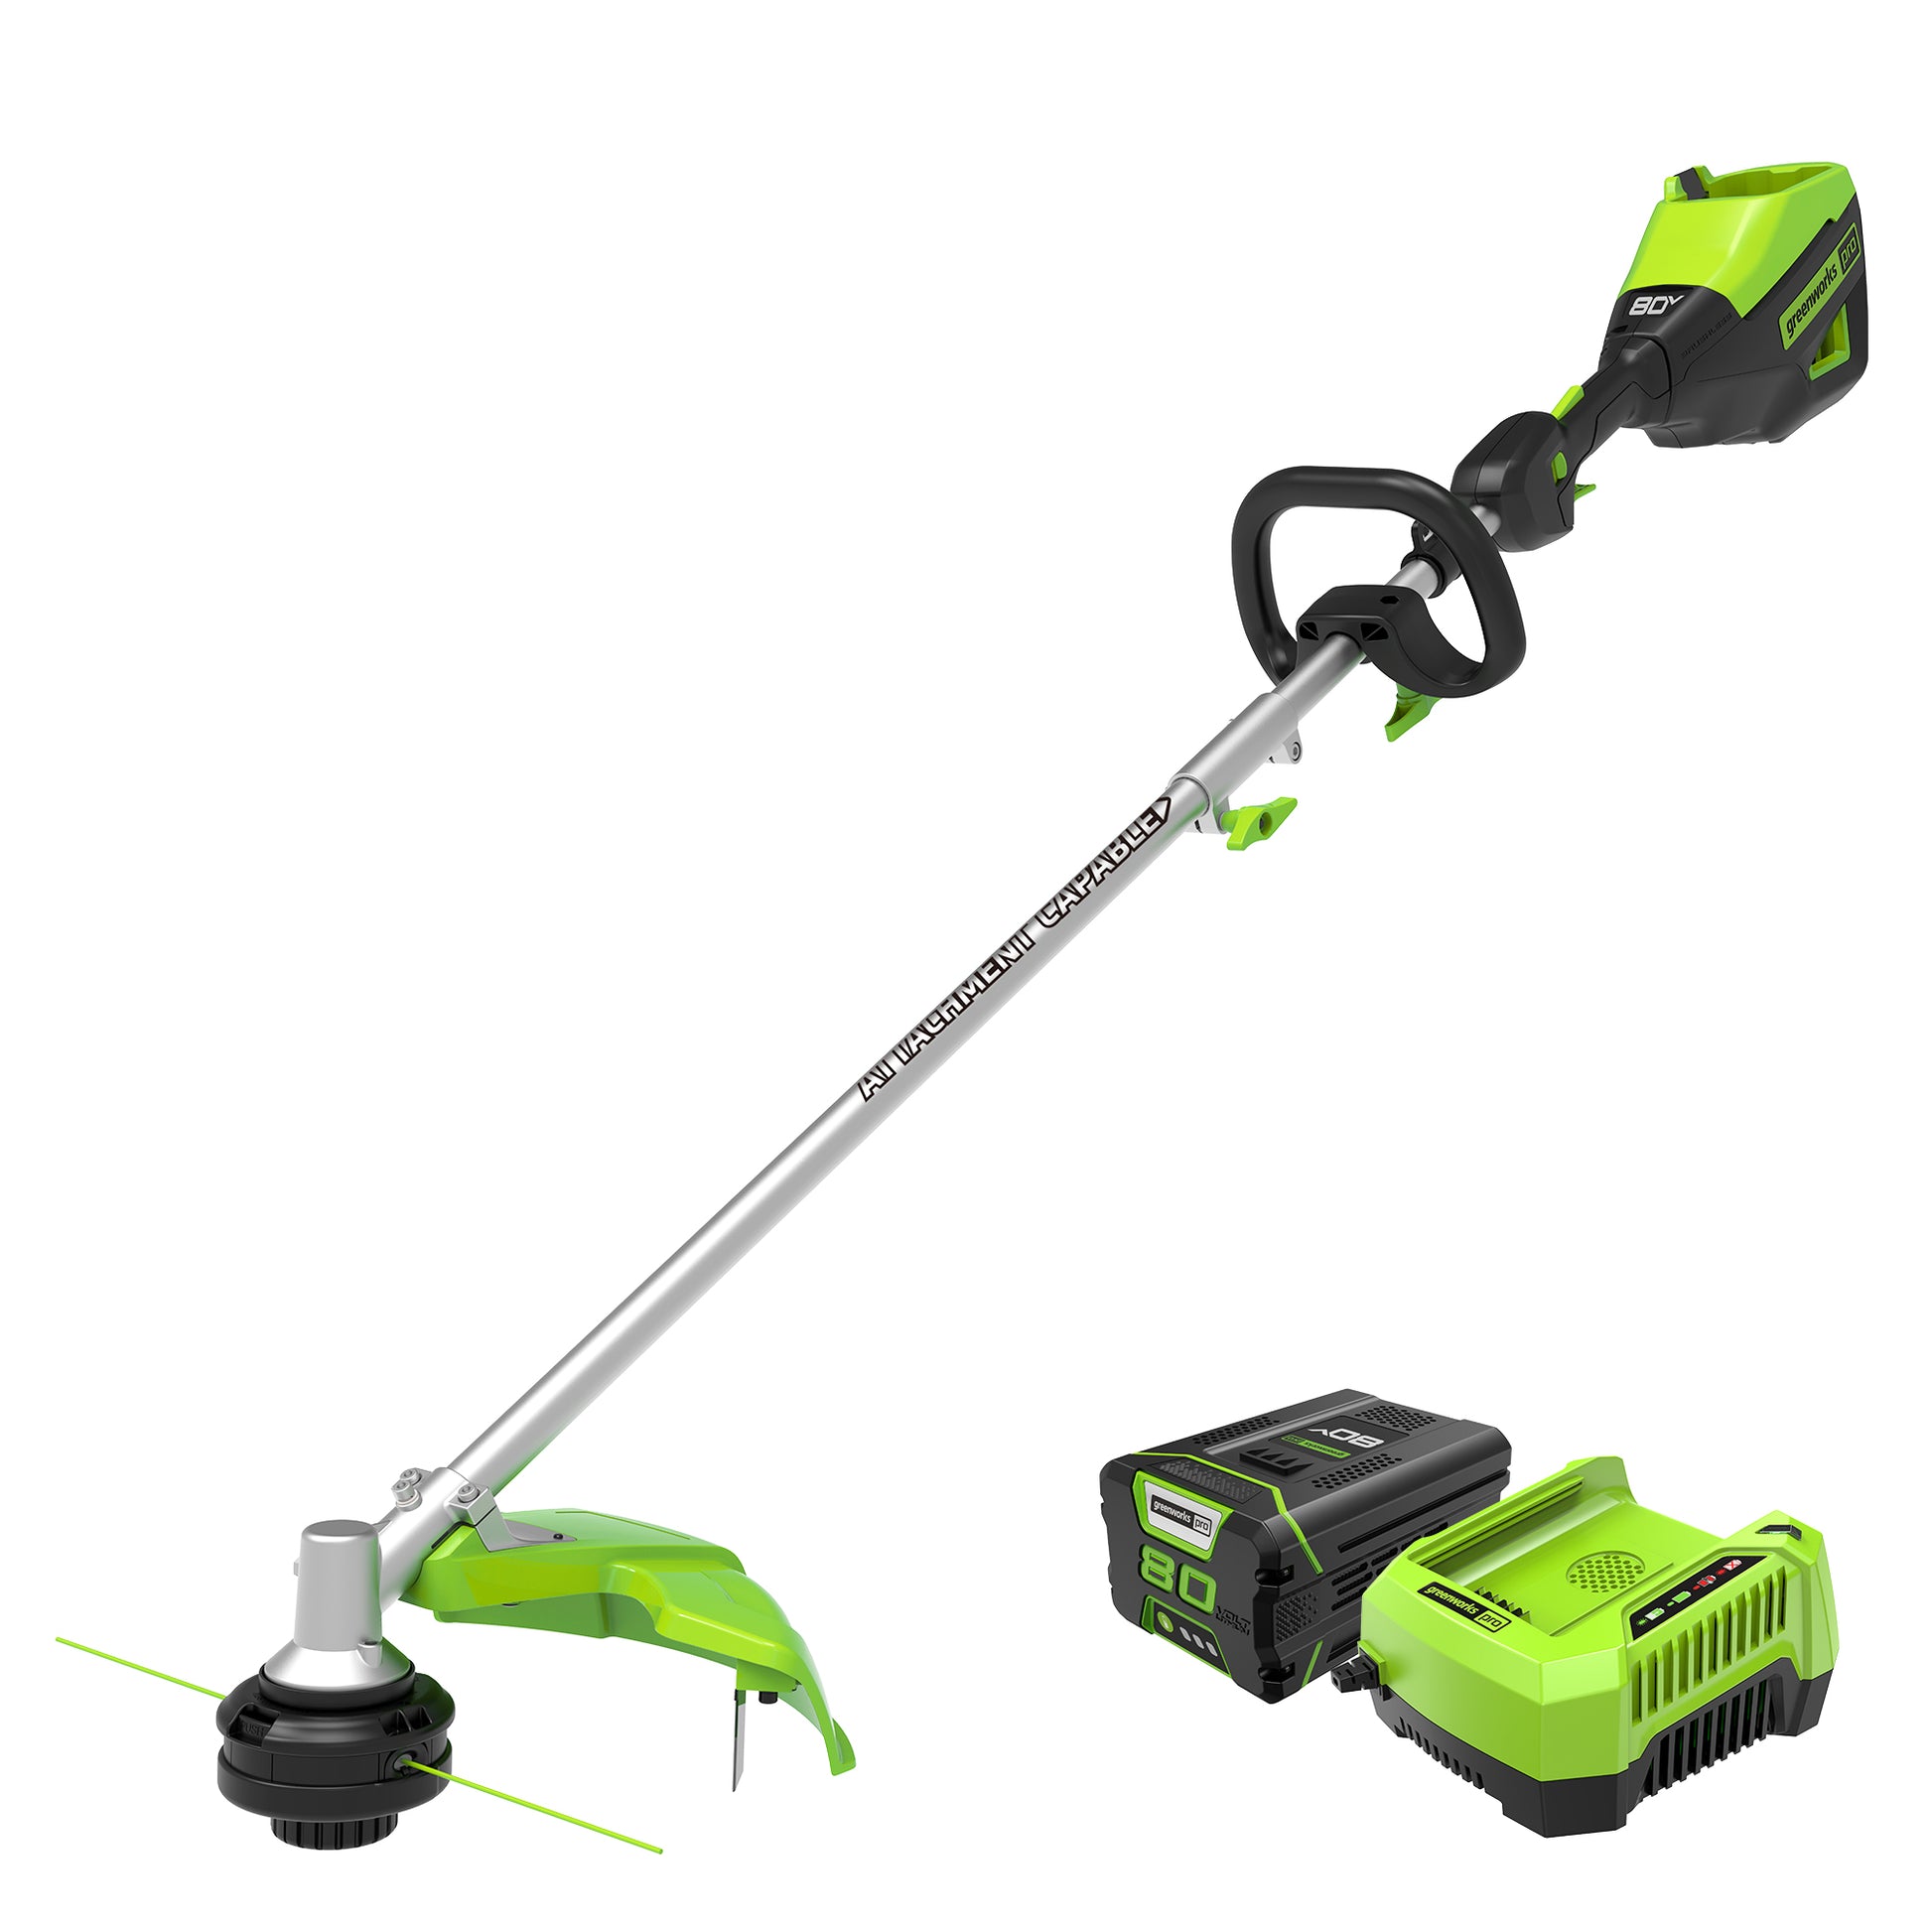 80V 16 Attachment Capable String Trimmer Battery | Greenworks Tools 